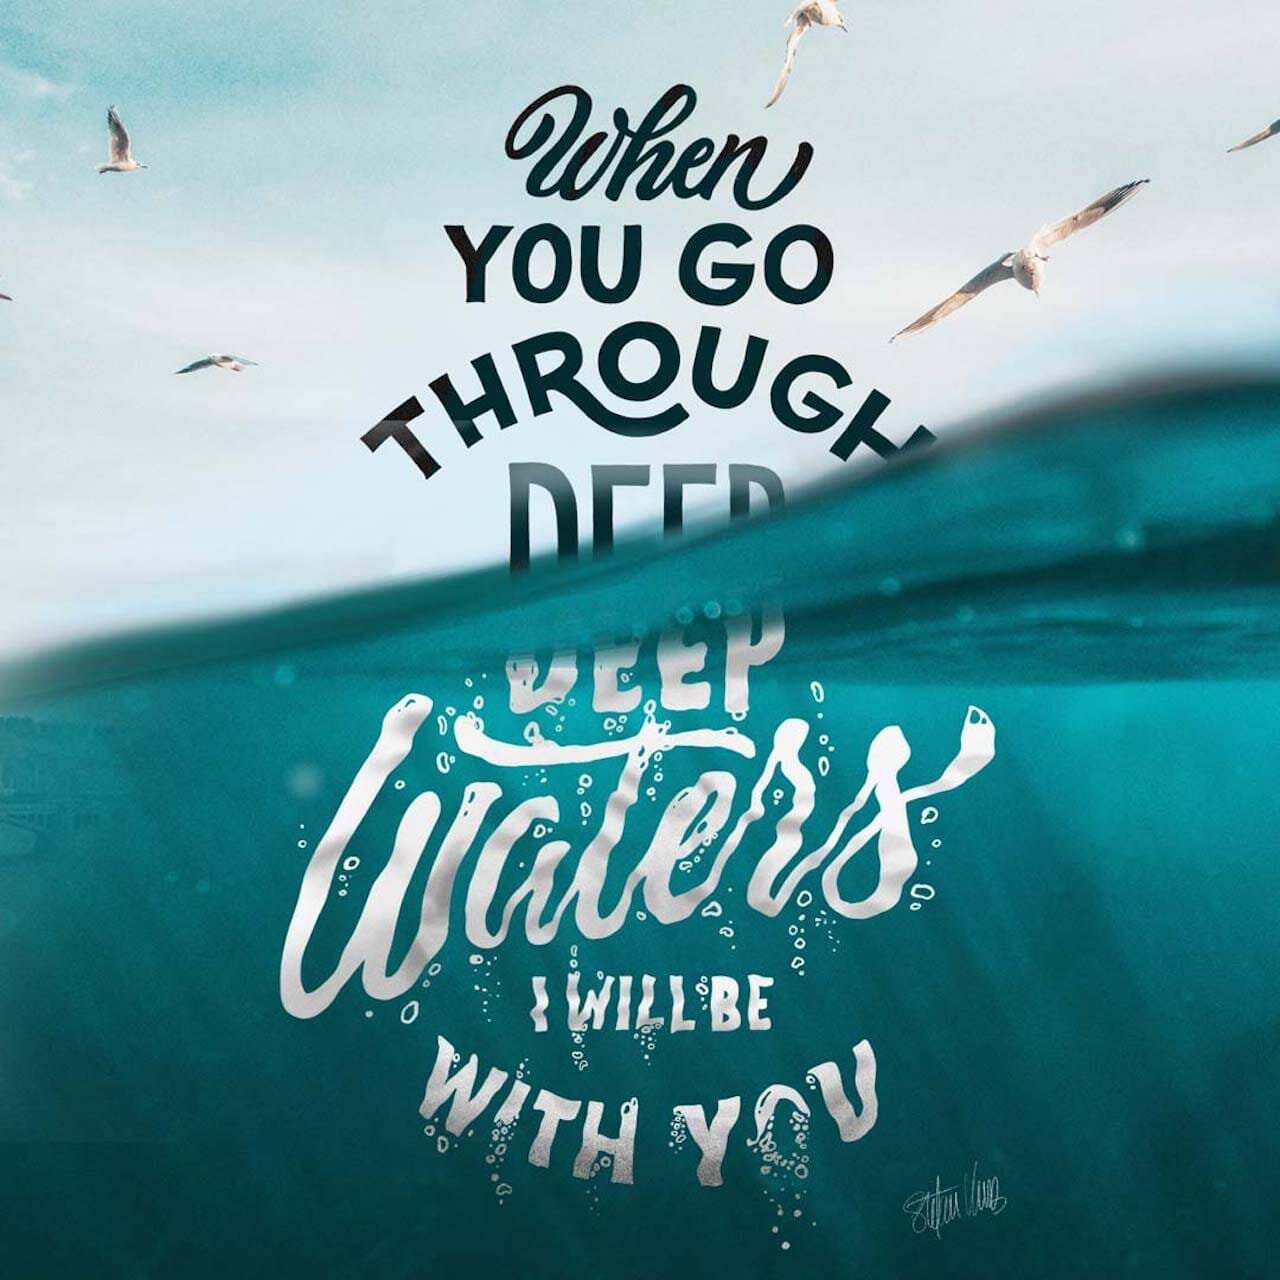 &quot;When you pass through the waters,  I will be with you;
and when you pass through the rivers,  they will not sweep over you.&quot;

Beautiful words of promise from Isaiah 43:2 that came up in our Zoom prayer meeting this morning. &lt;3